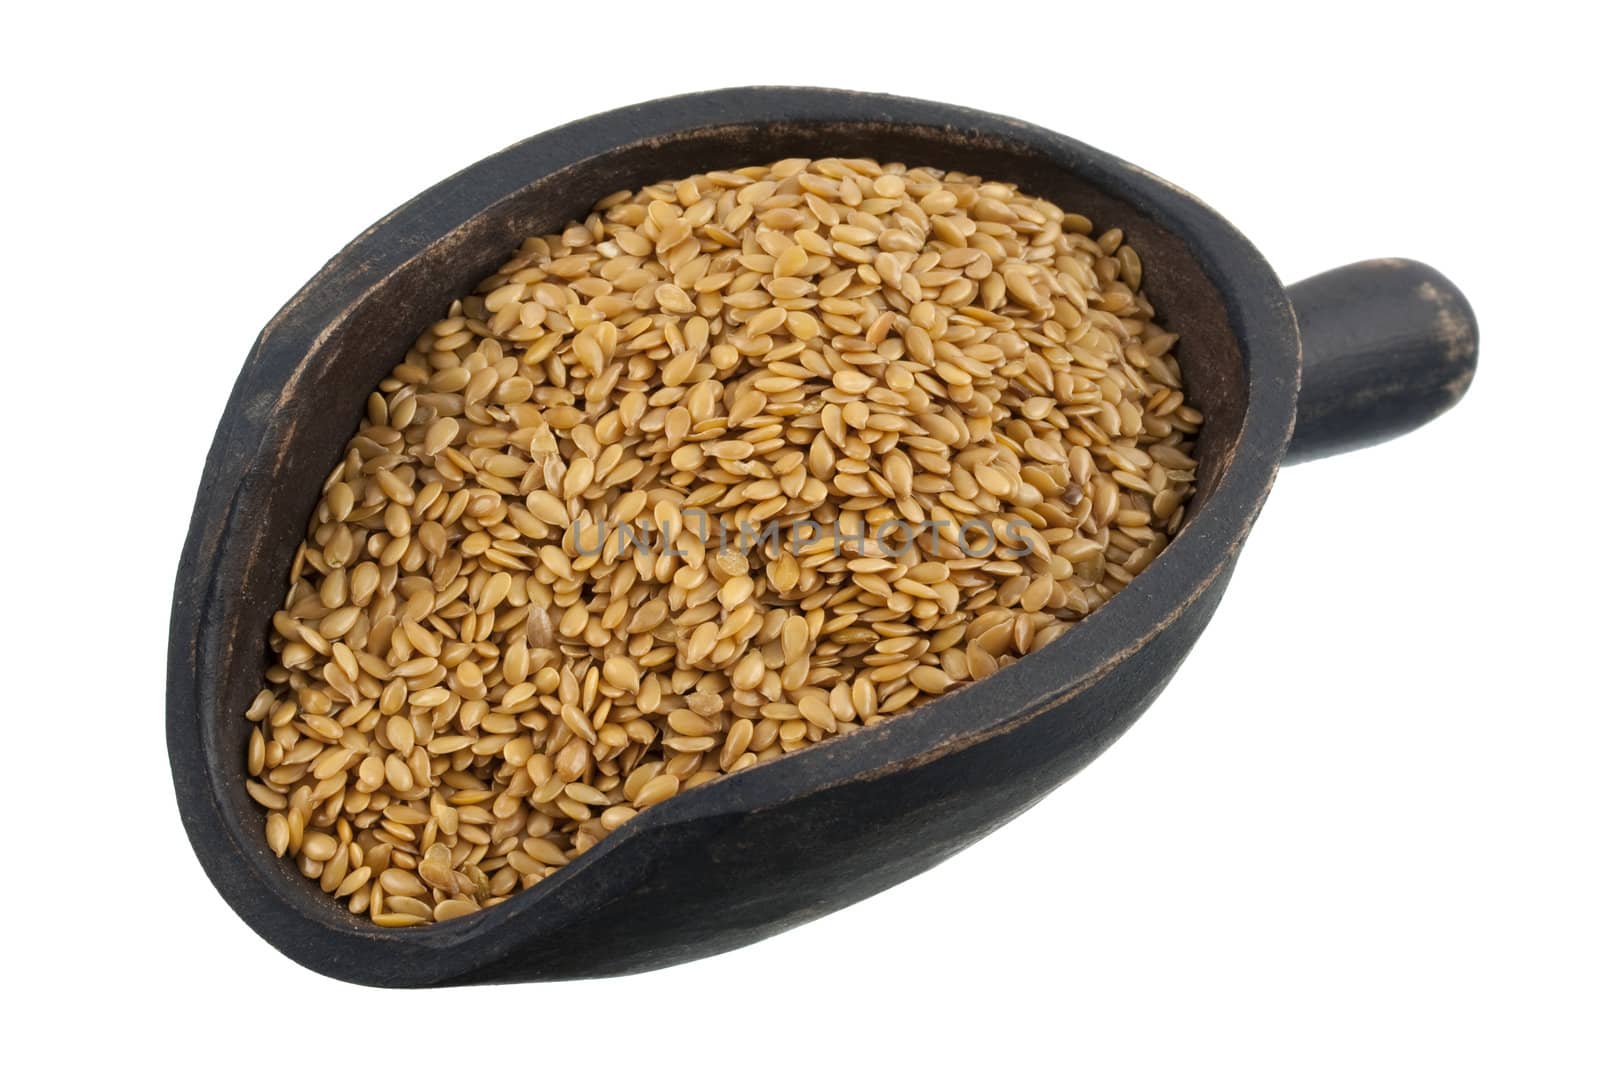 golden flax seeds on a rustic, wooden, dark painted scoop, isolated on white